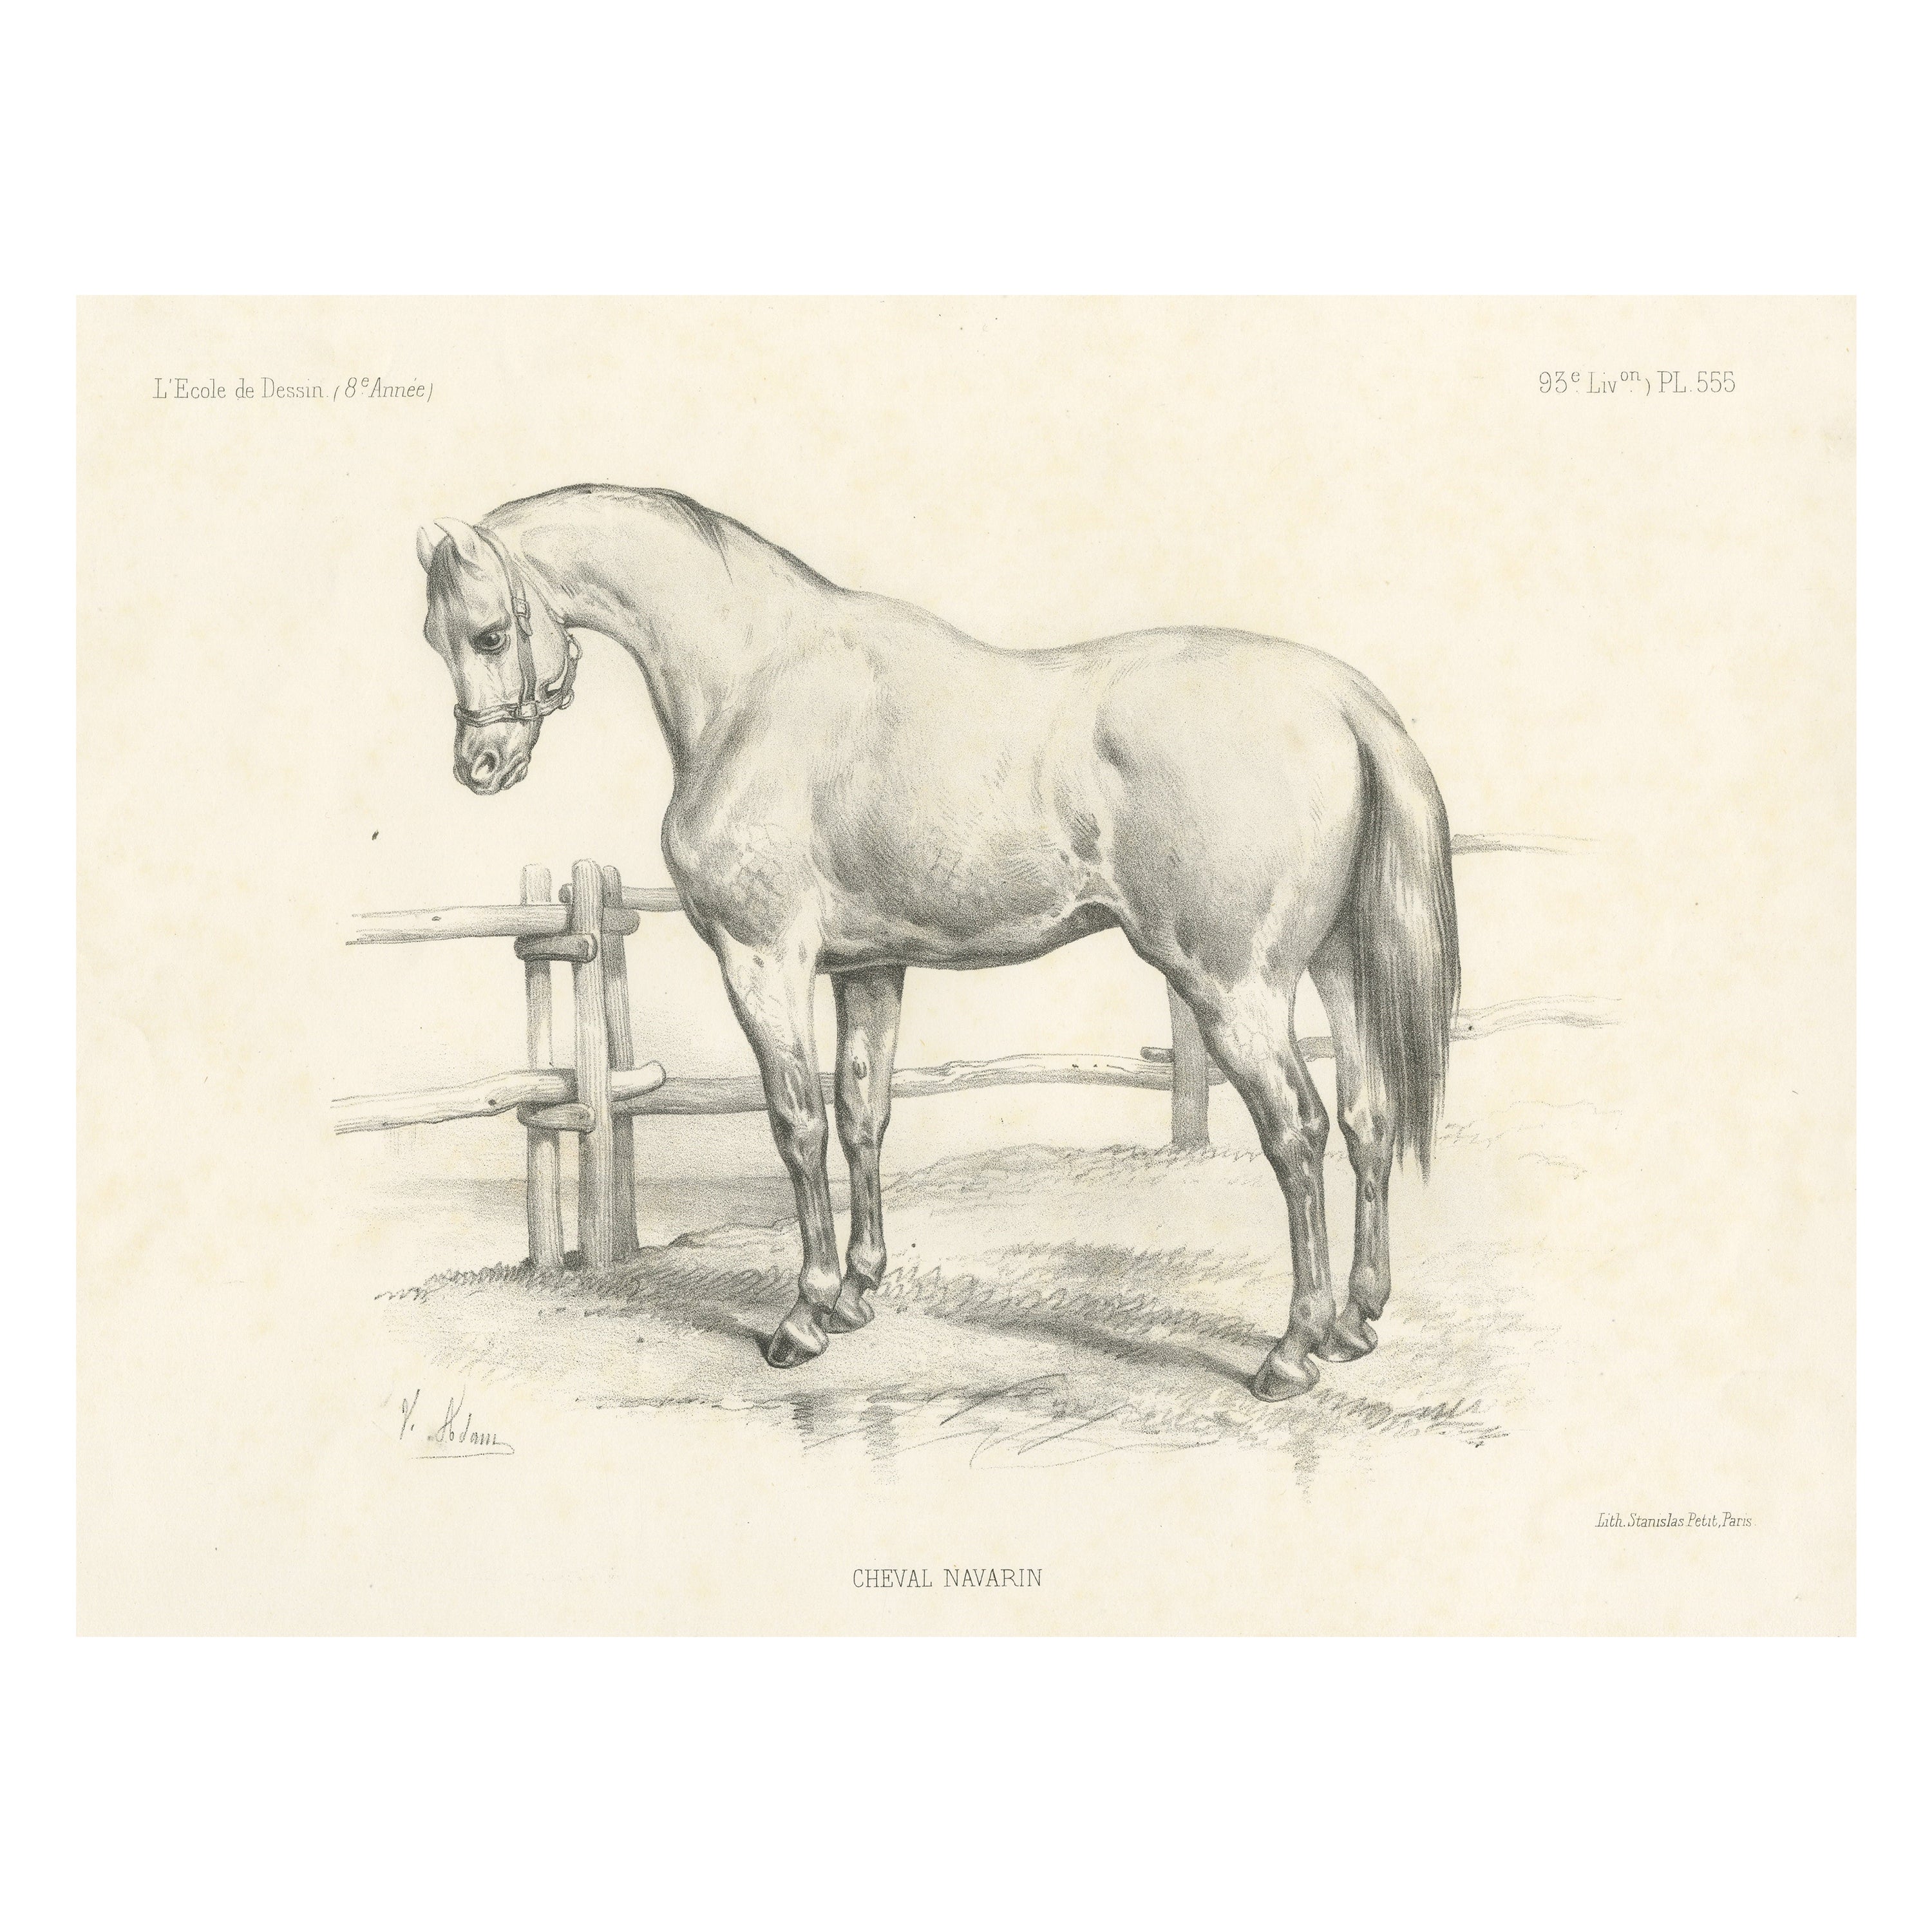 Original Antique Print of a Navarrin Horse, an Extinct Breed from France For Sale